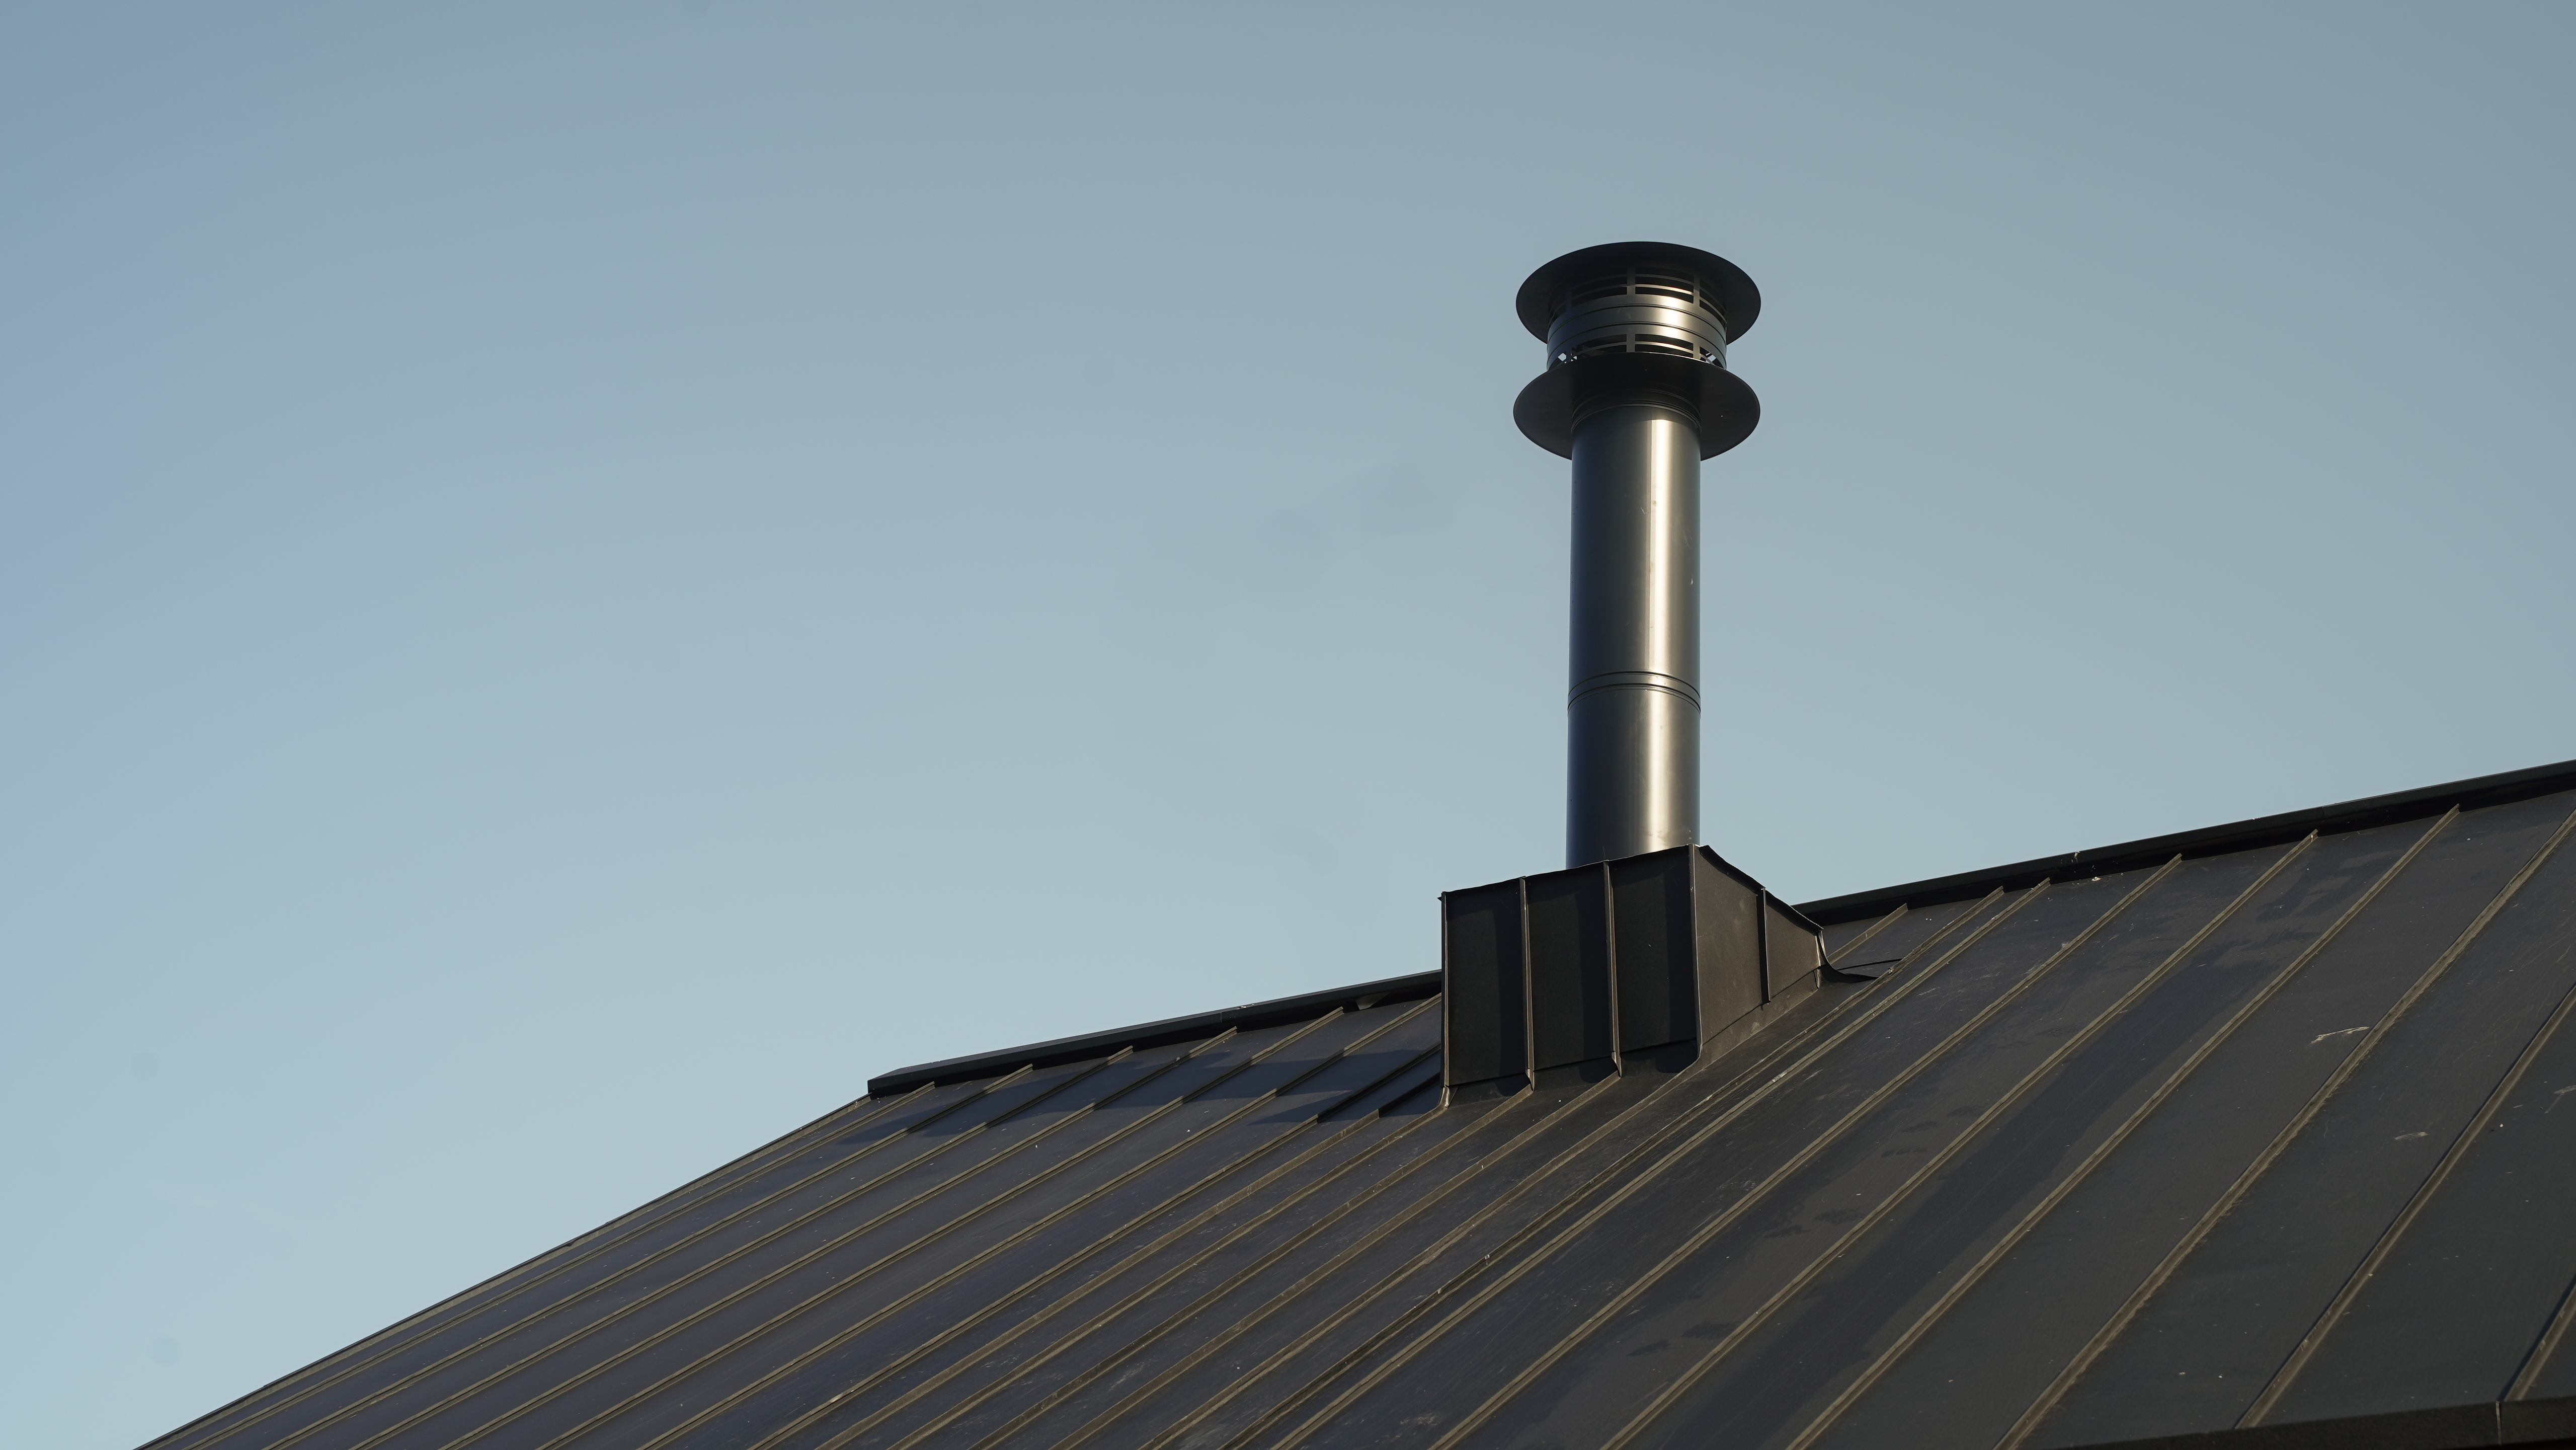 Close-up of a PREFALZ roof system in P.10 black on the "Golf it!" complex in Glasgow, Scotland, with a striking, modern chimney. The chimney rises elegantly above the precisely laid, dark standing seam sheets, which are known for their durability and robustness. This image underlines the combination of functionality and design that PREFA aluminium products offer.